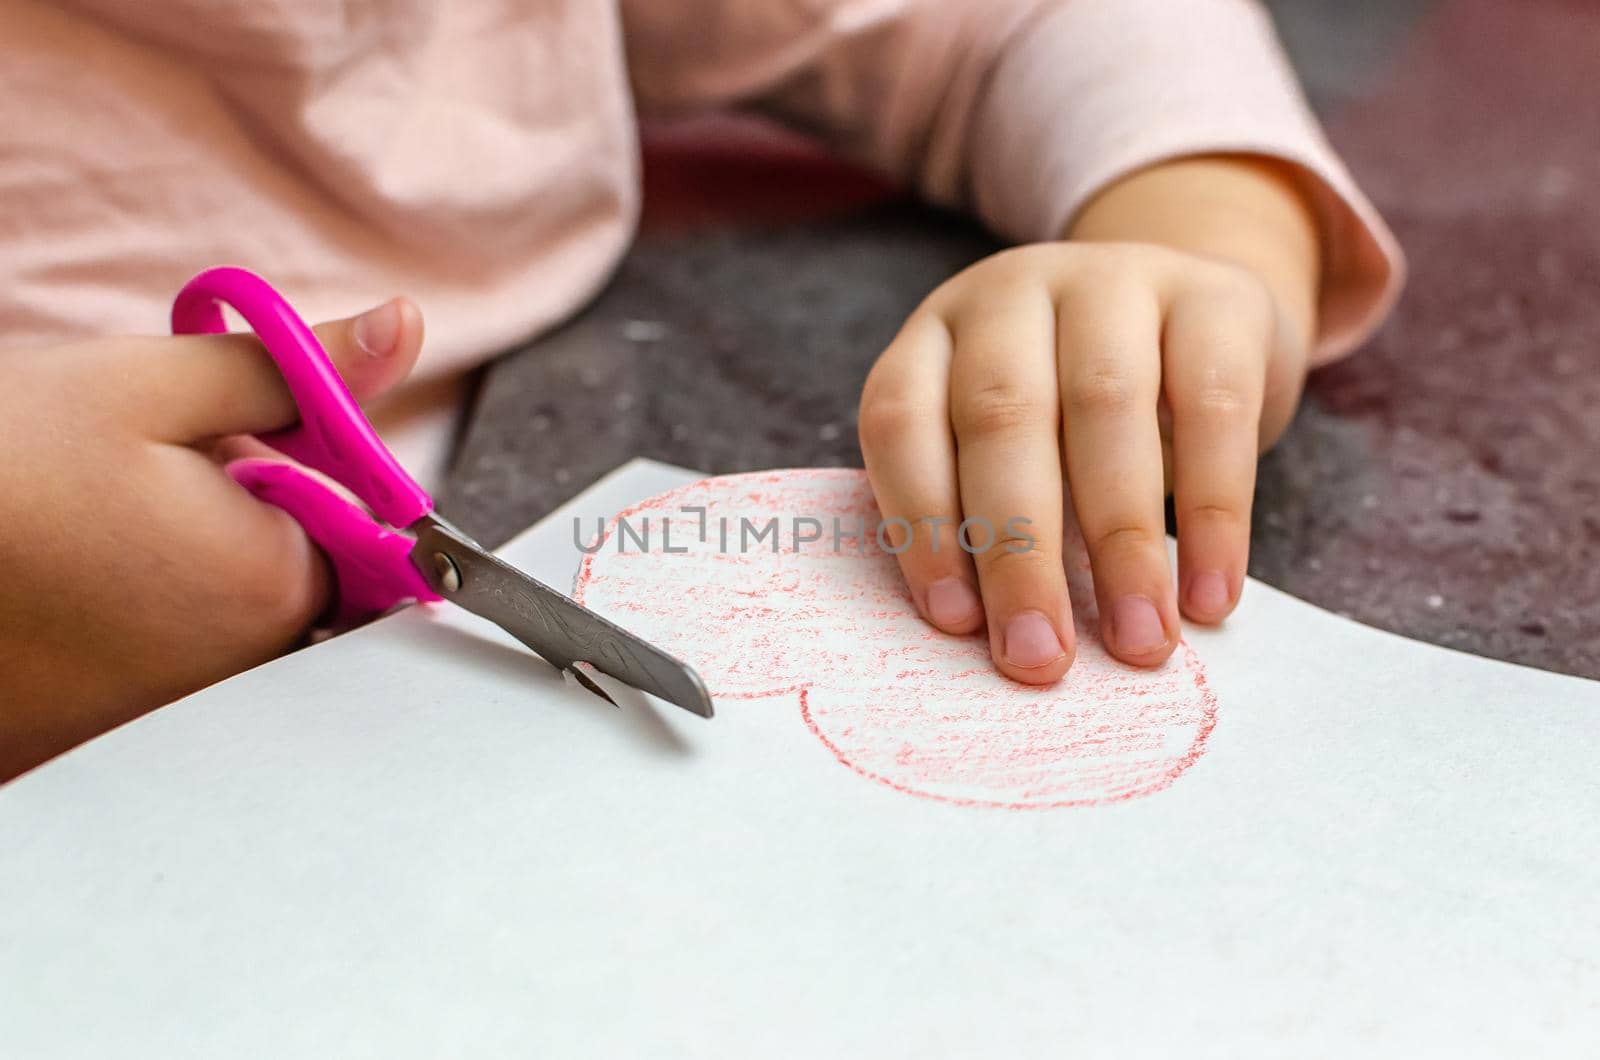 The girl's hand holds a heart cut from paper. Children's creativity - drawings and crafts for Valentine's Day or Mother's Day